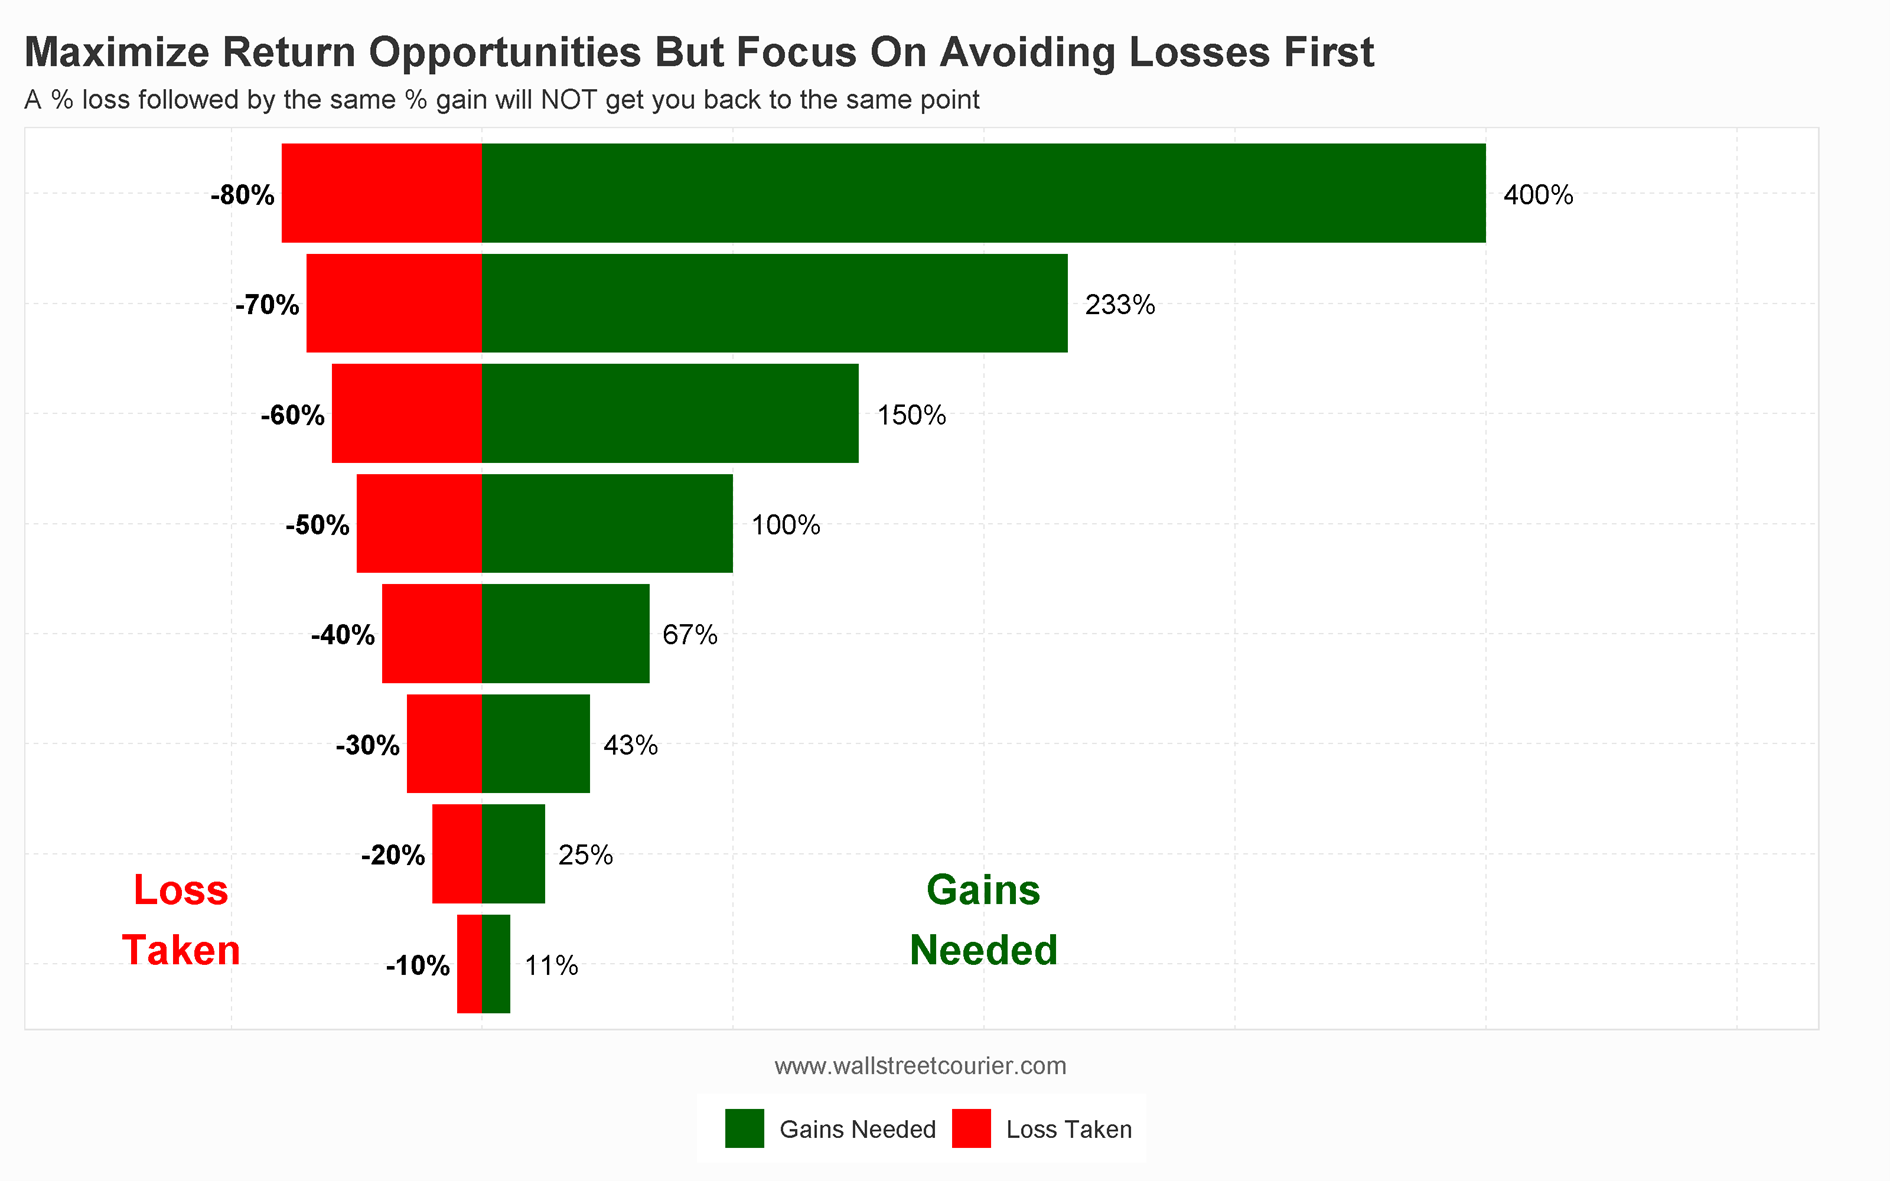 A chart showing the gains needed to recover from losses, with a bar graph illustrating the percentage of gains needed to recover from various levels of losses. The chart highlights the importance of not only aiming for gains, but also avoiding significant losses in order to maximize returns in the long-term. The text emphasizes that risk management and loss prevention should be a key component of any investment strategy.